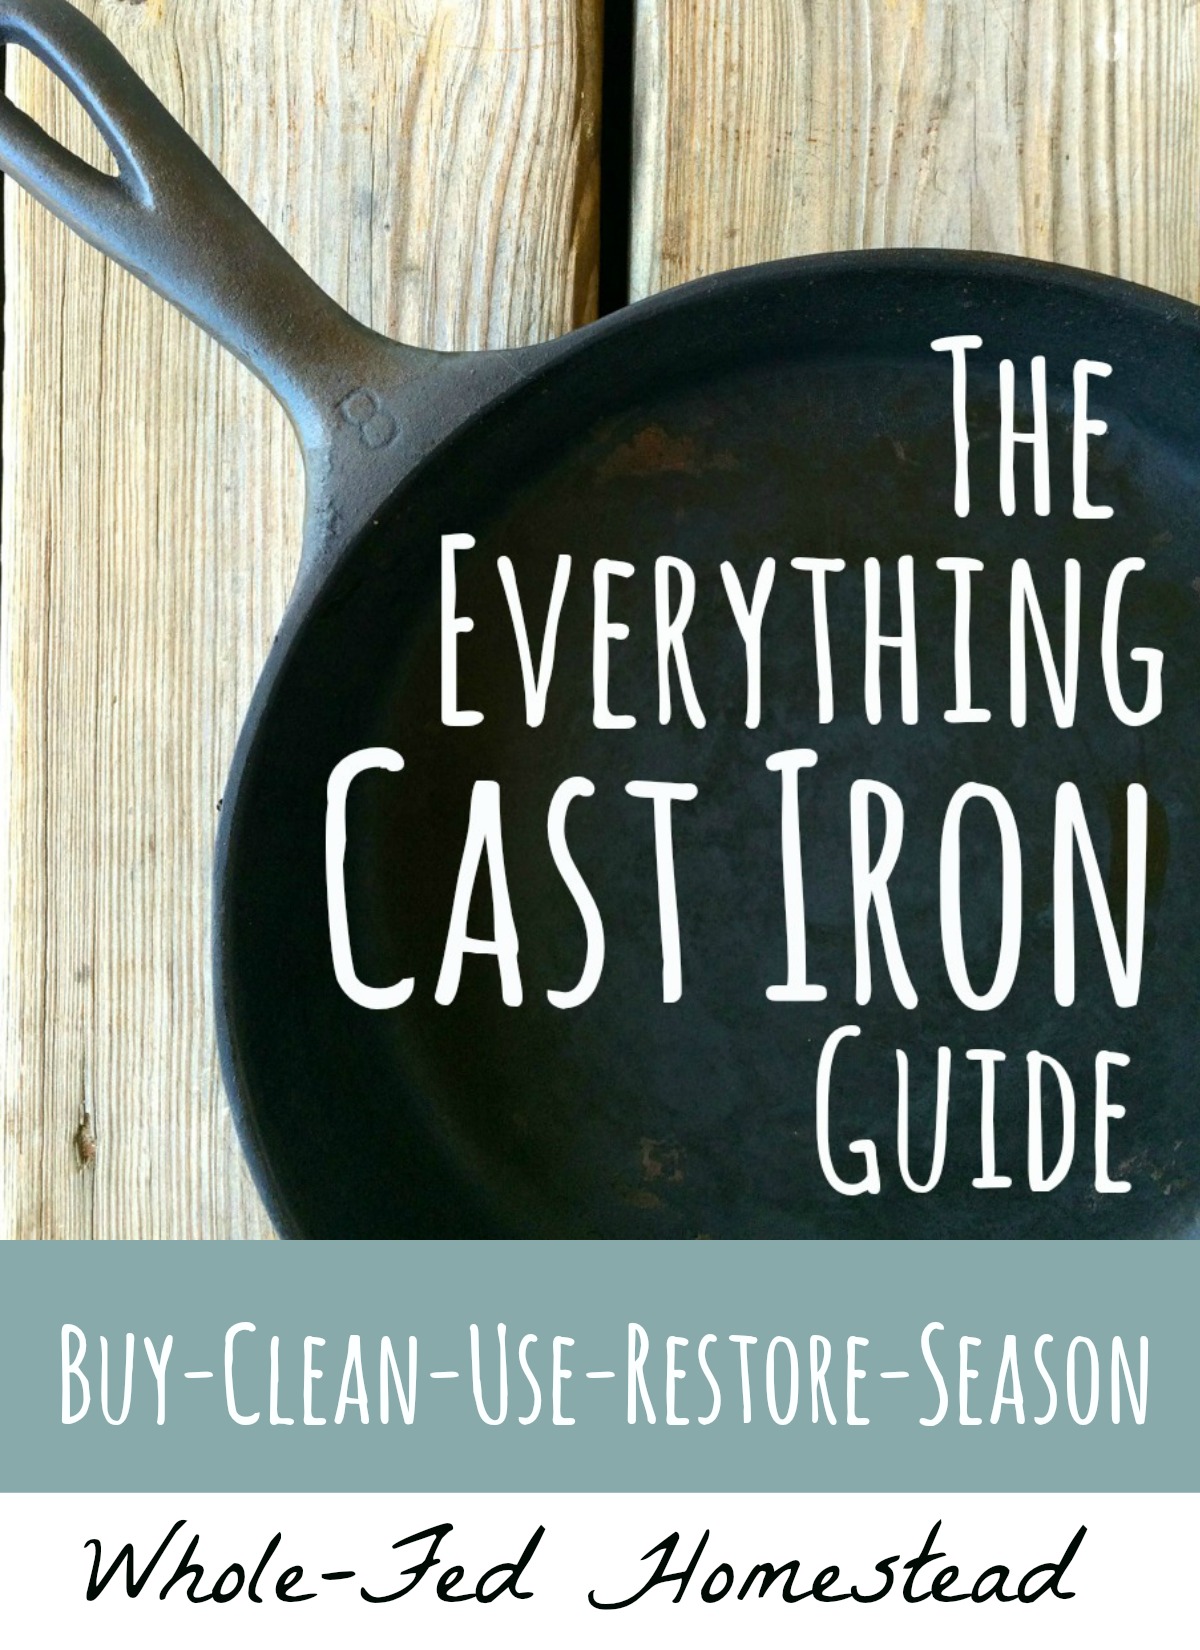 The Everything Cast Iron Guide: How to Buy, Clean, Use, Restore and Season Cast Iron Pans